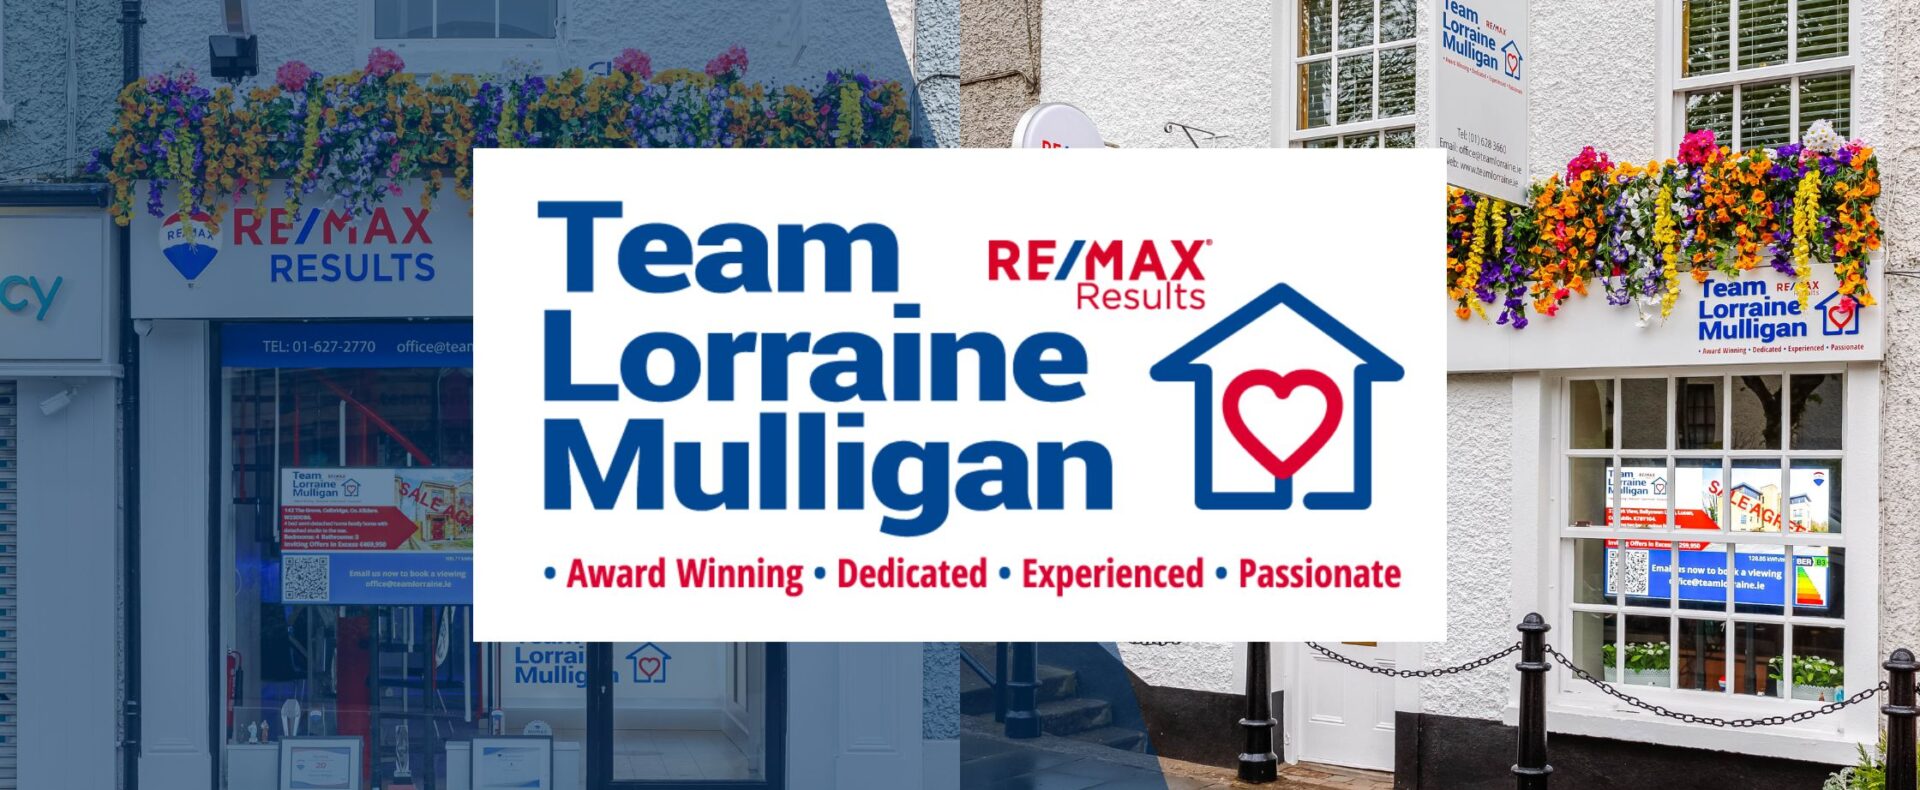 Free property Valuation, buyers and sellers guide, Team Lorraine Mulligan Logo, Team Lorraine Mulligan office in Celbridge, Team Lorraine Mulligan Office in Lucan